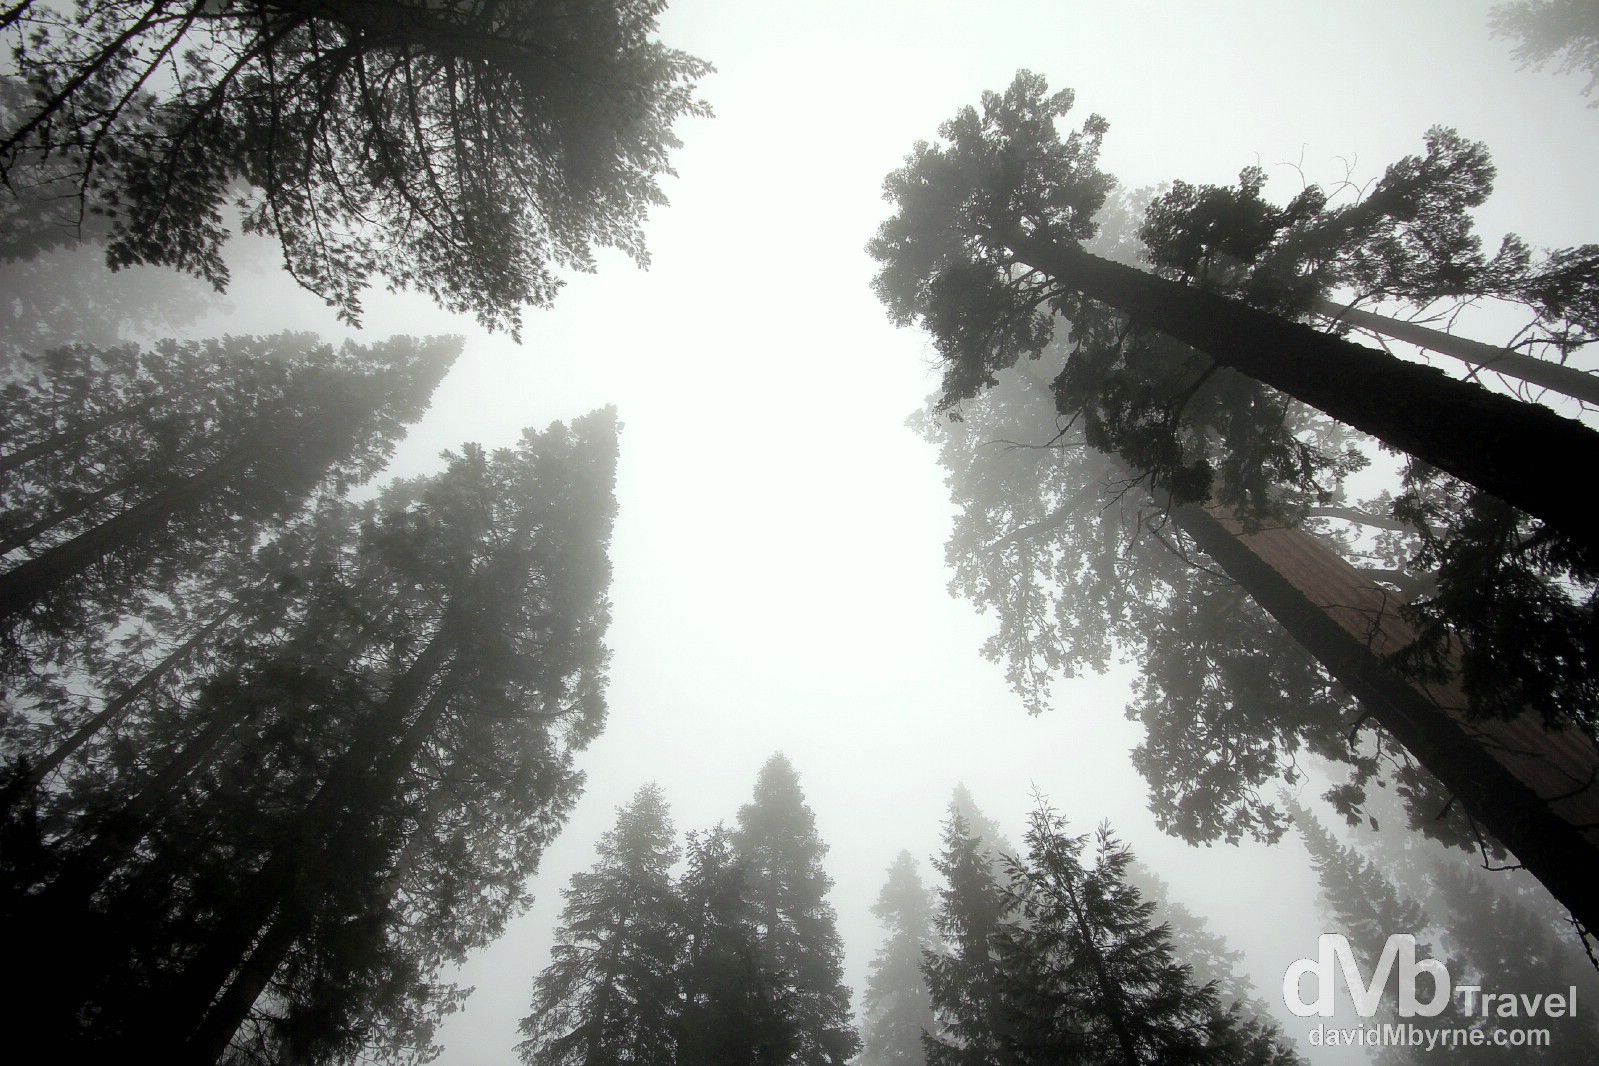 Mist & trees in Sequoia National Park, California, USA. April 2nd 2013.